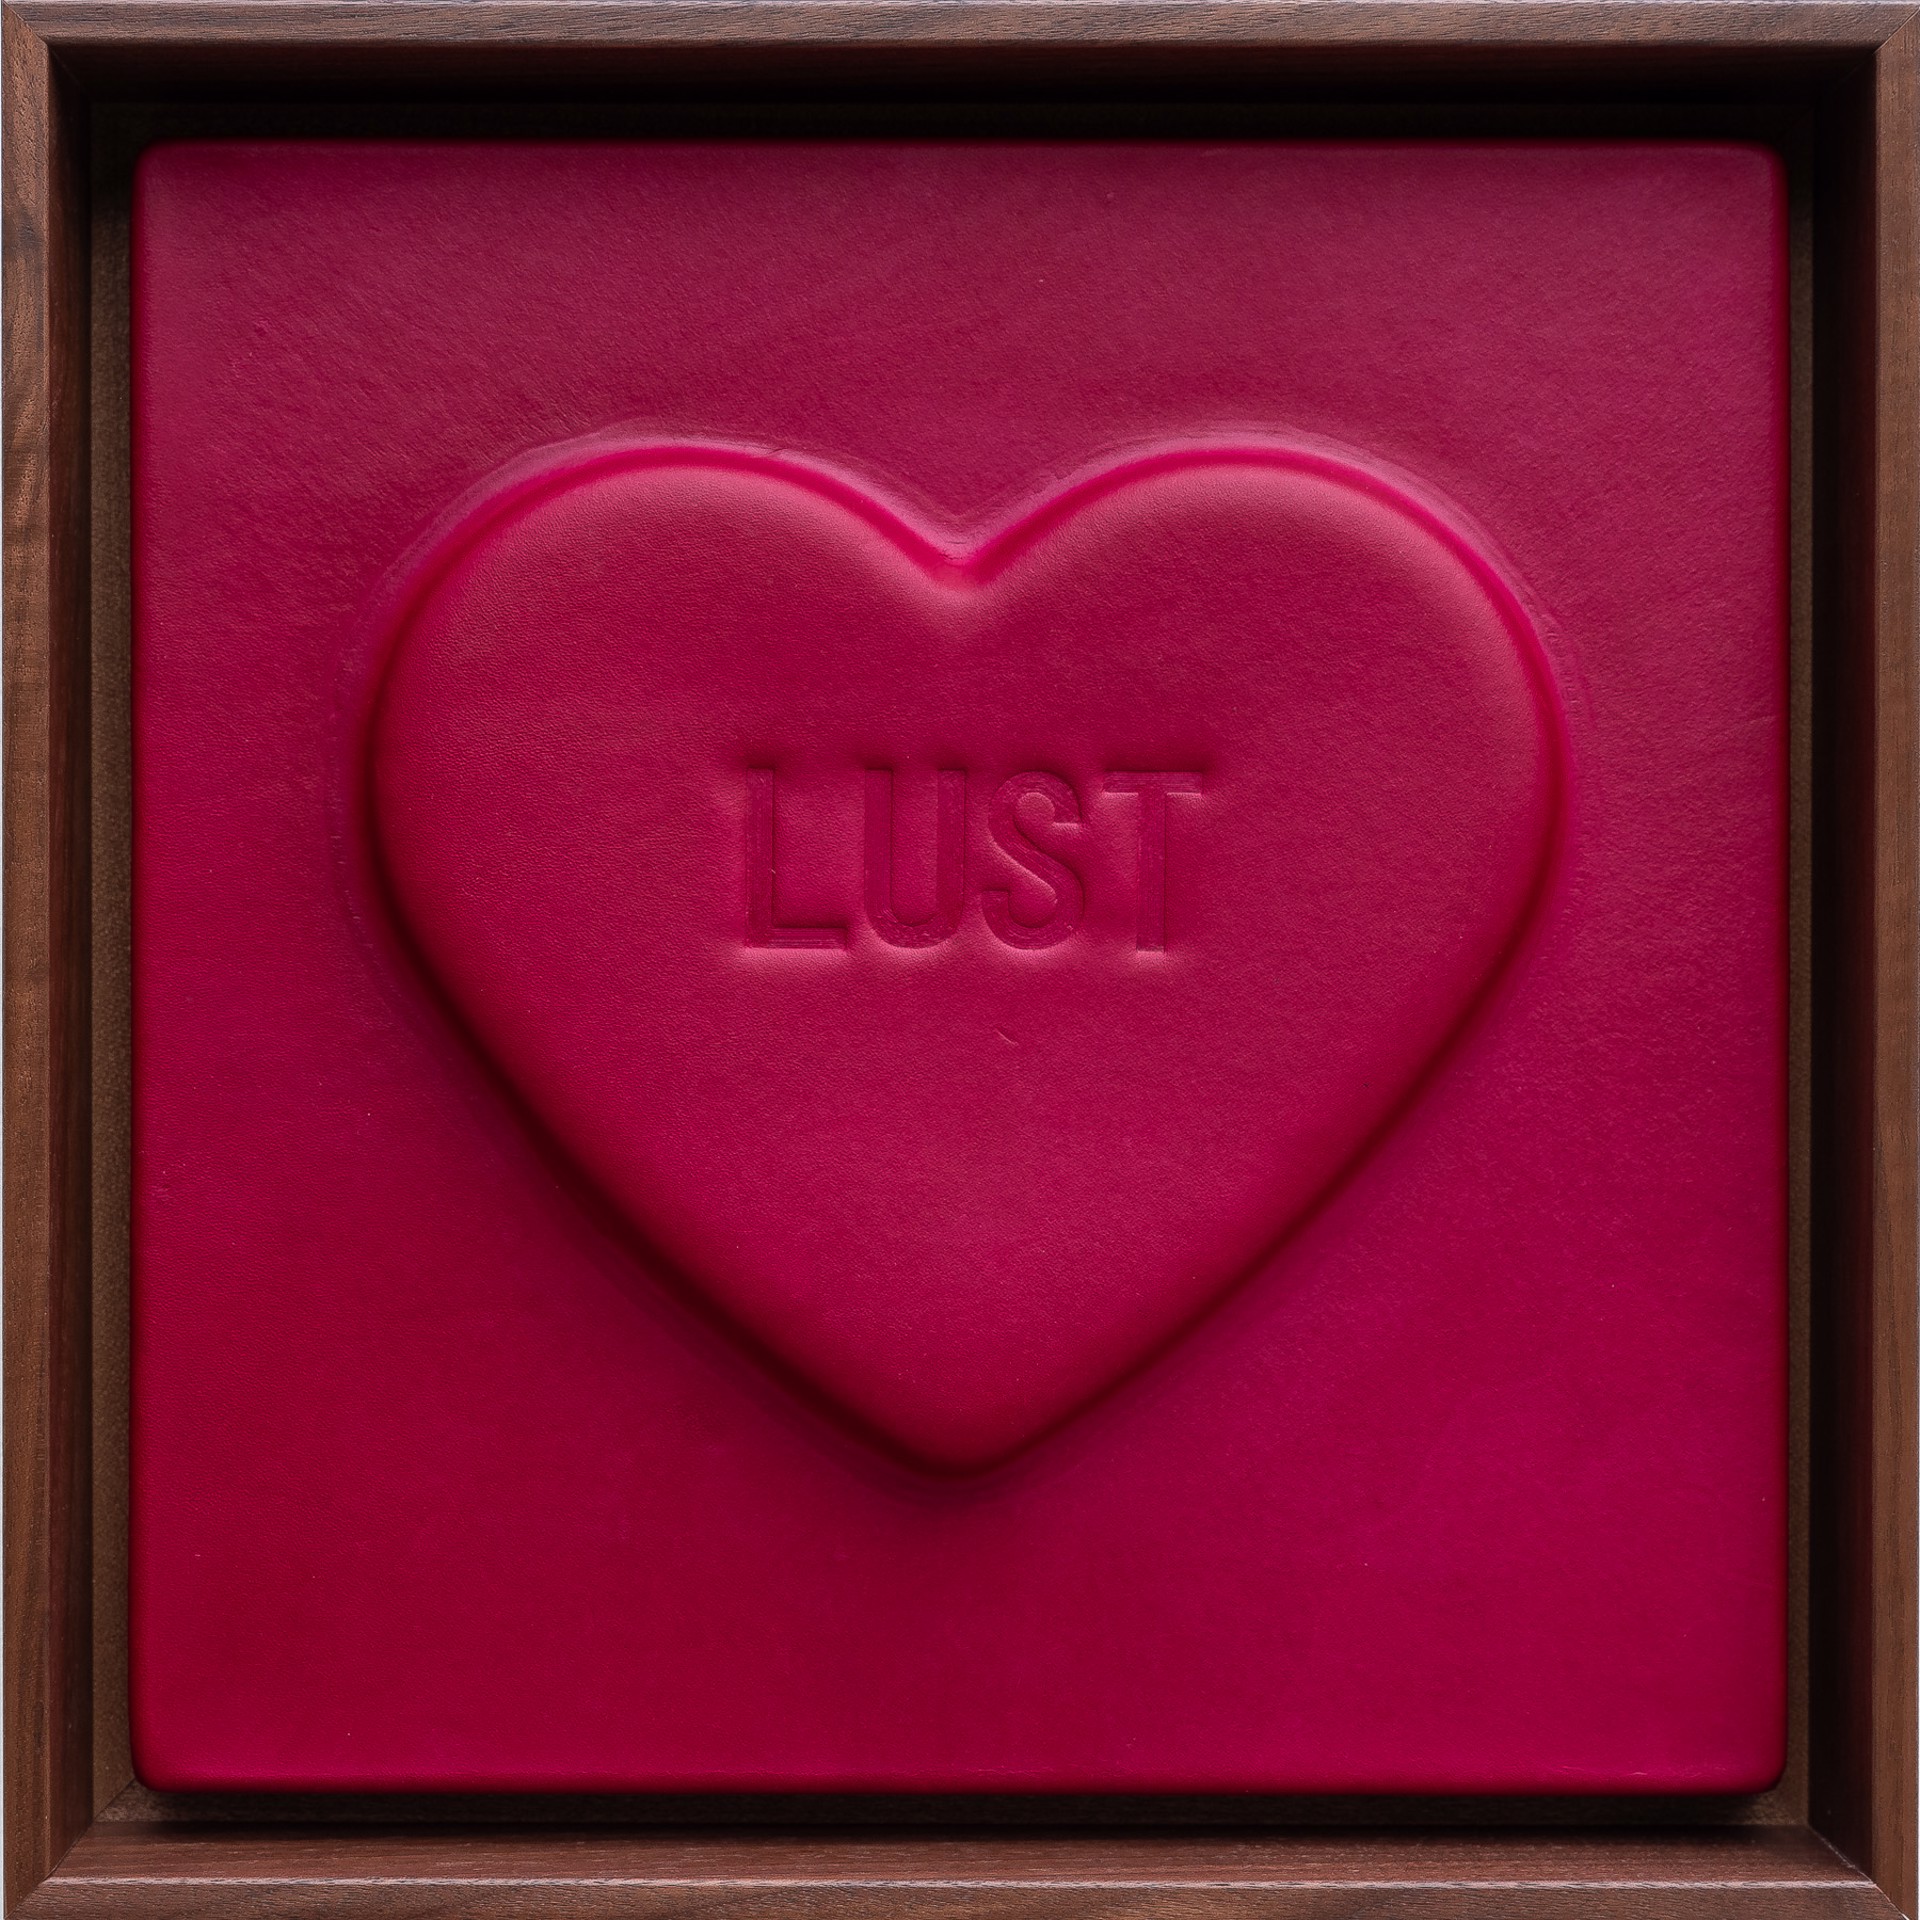 'LUST' - Sweetheart series by Mx. Hyde